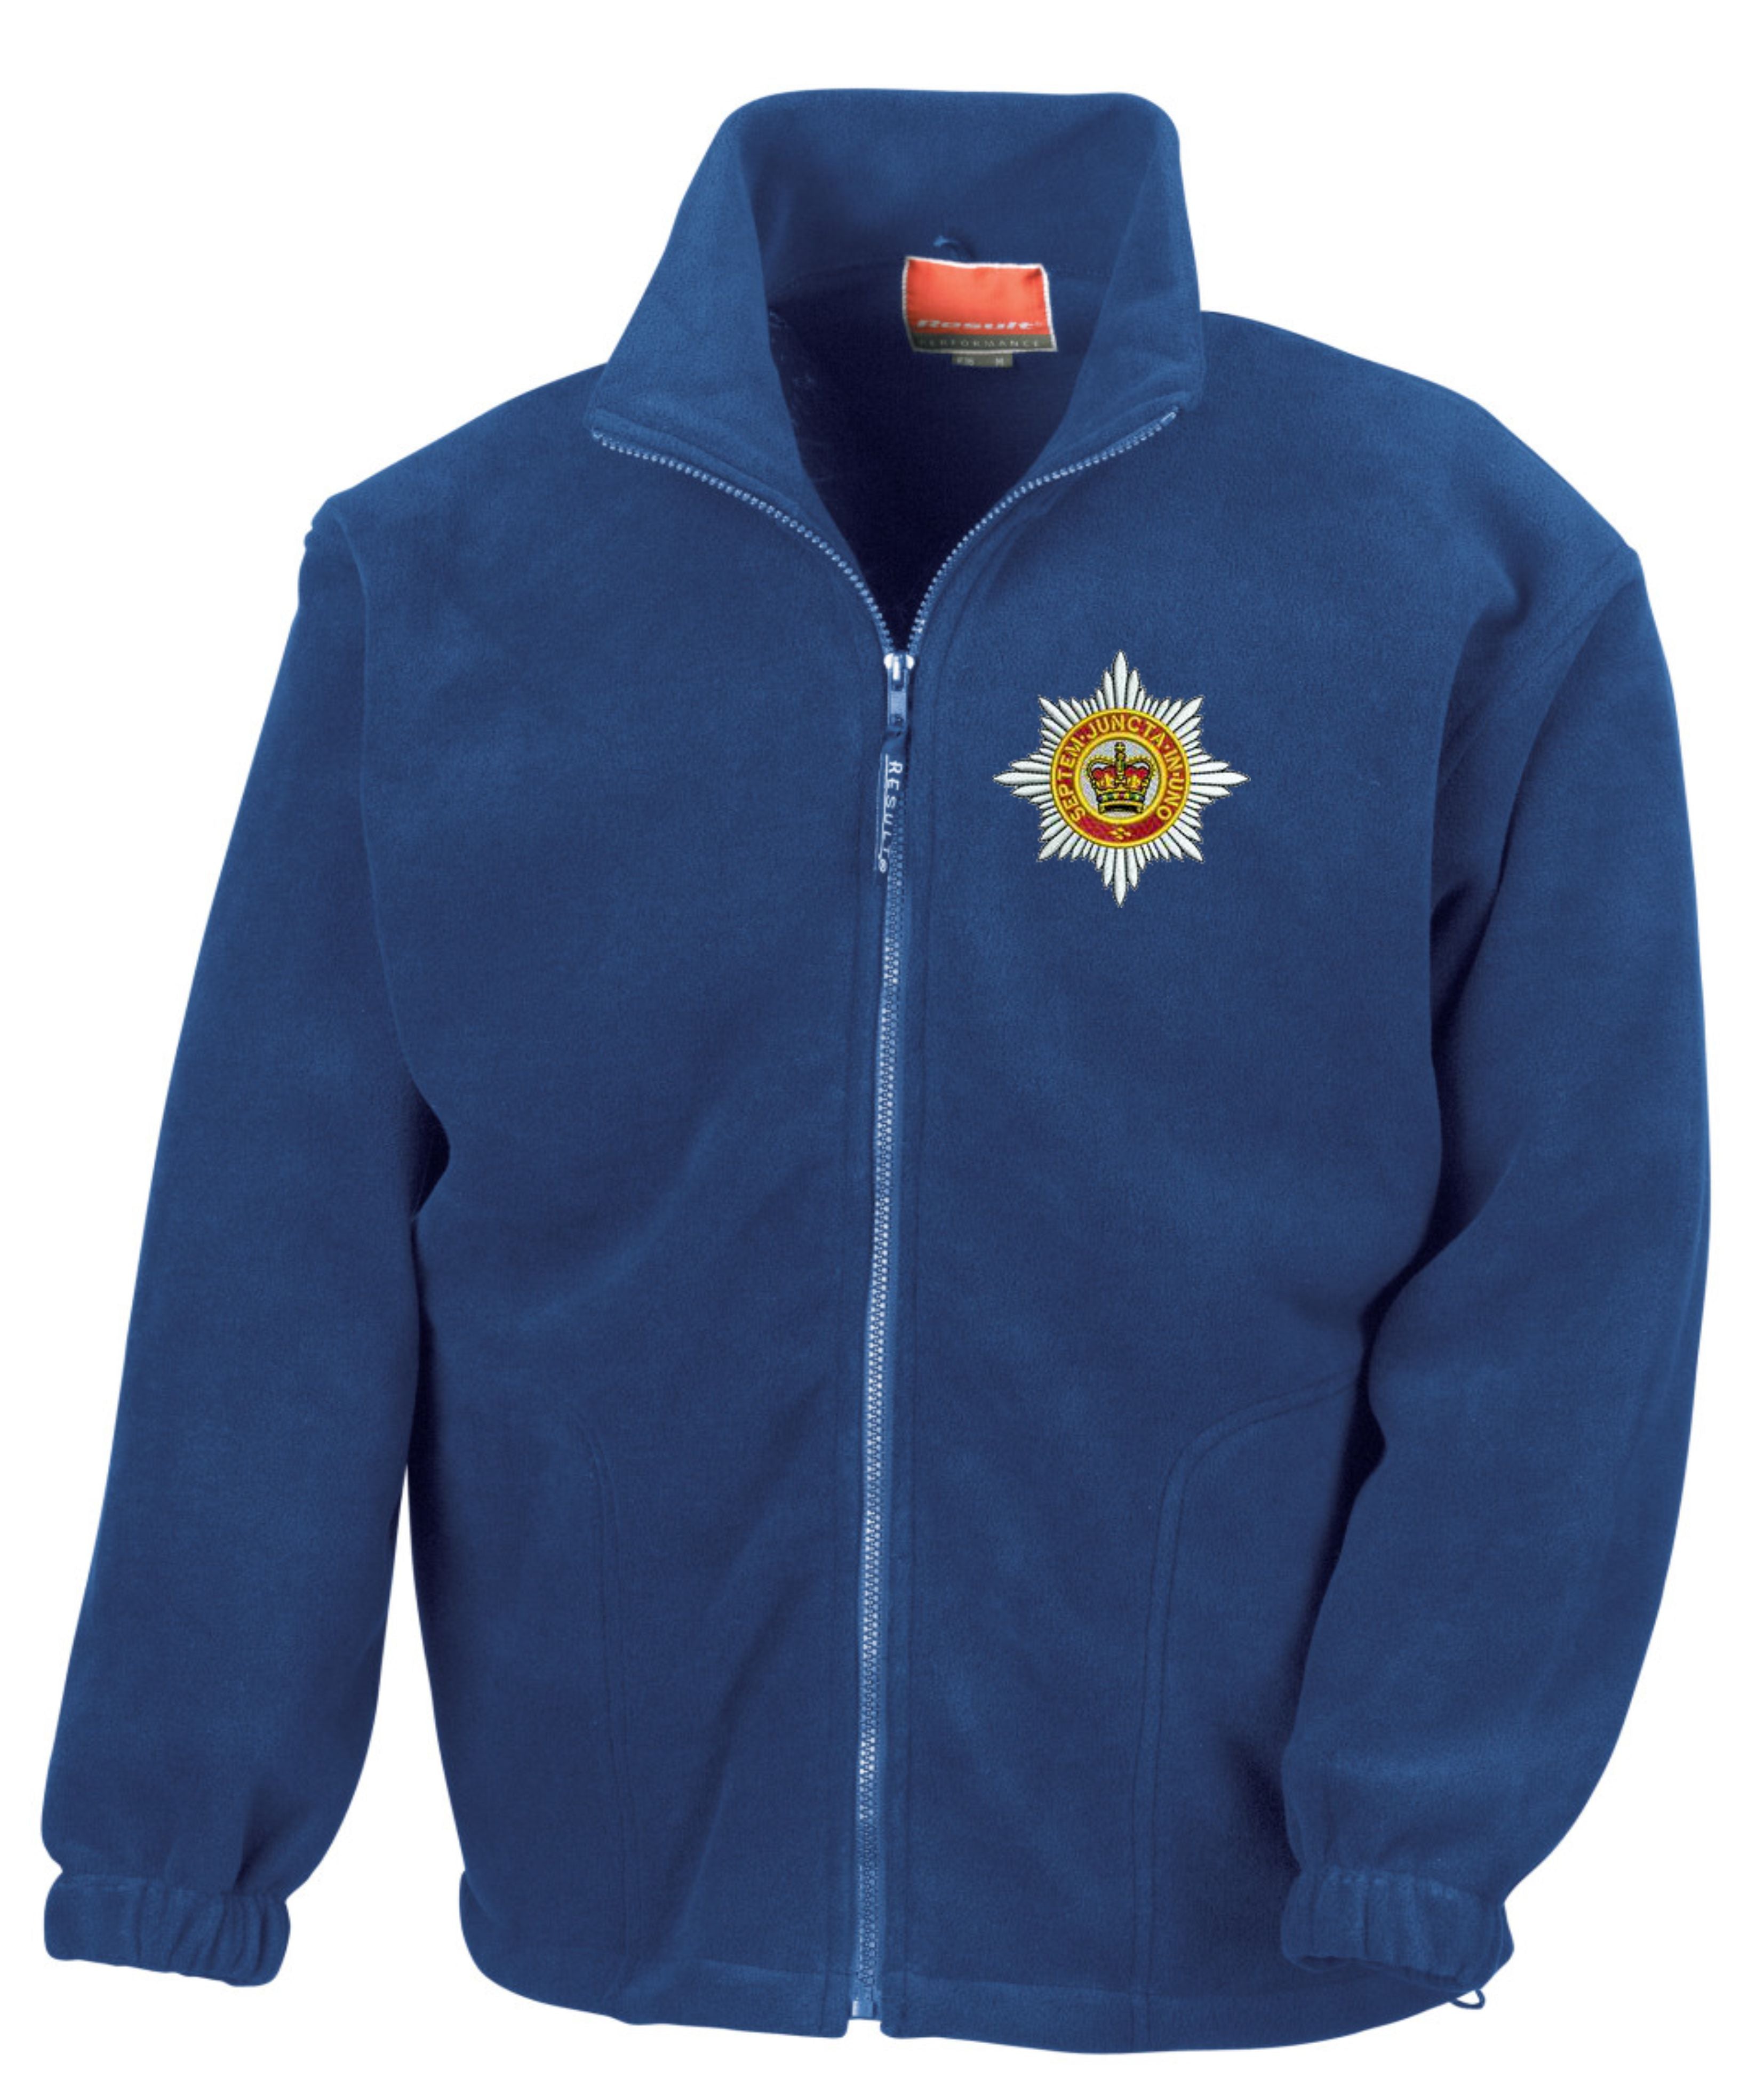 Household Division fleeces